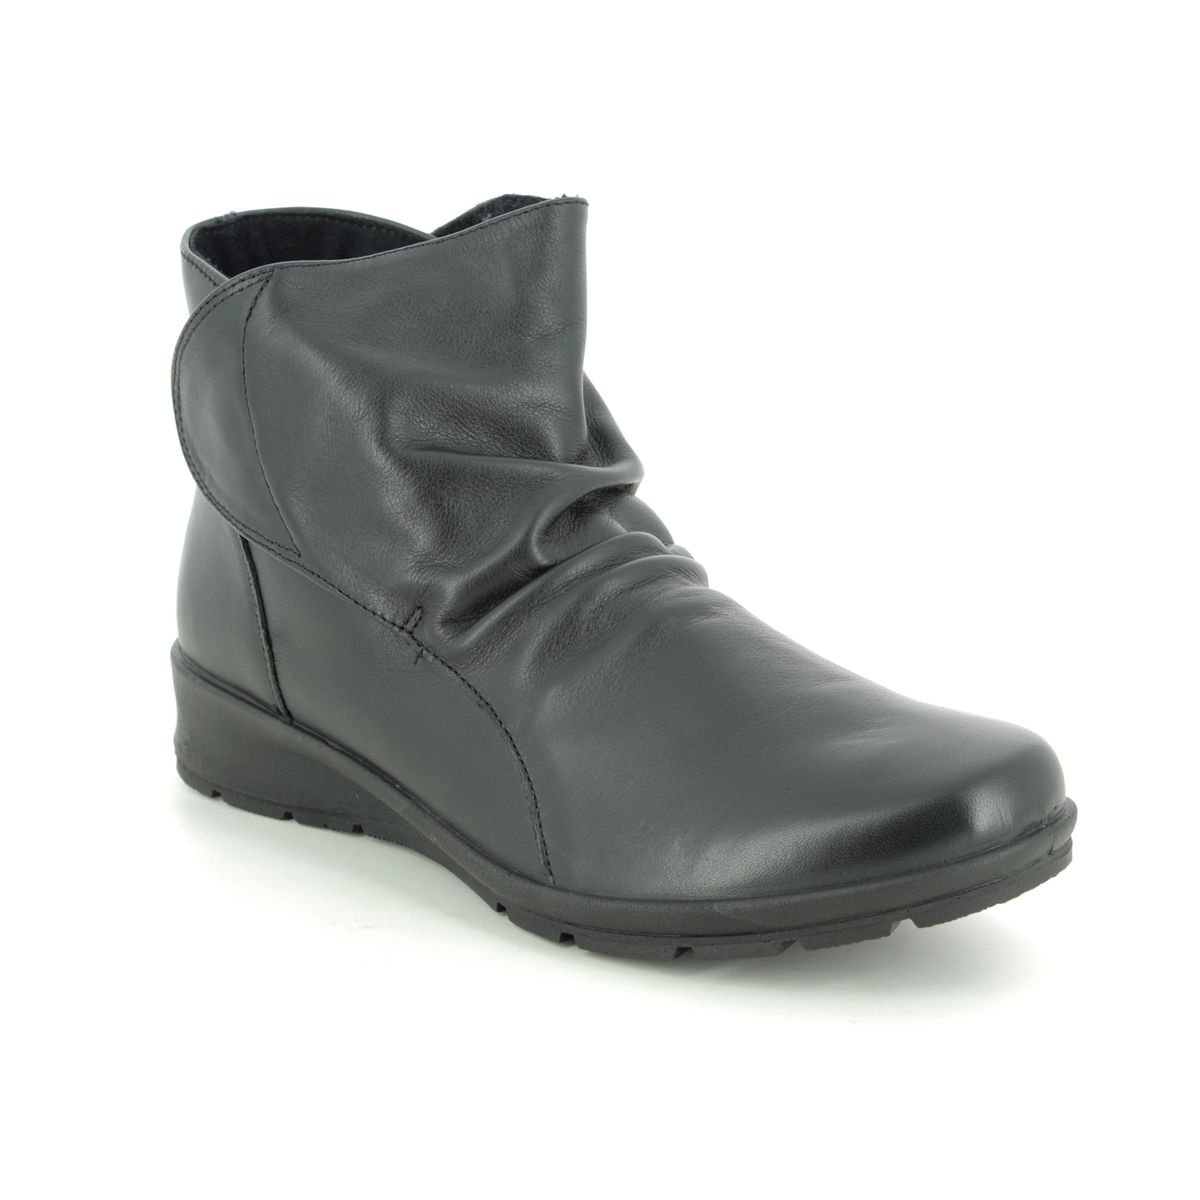 IMAC Kristal Slouch 6070-1400011 Black leather Ankle Boots